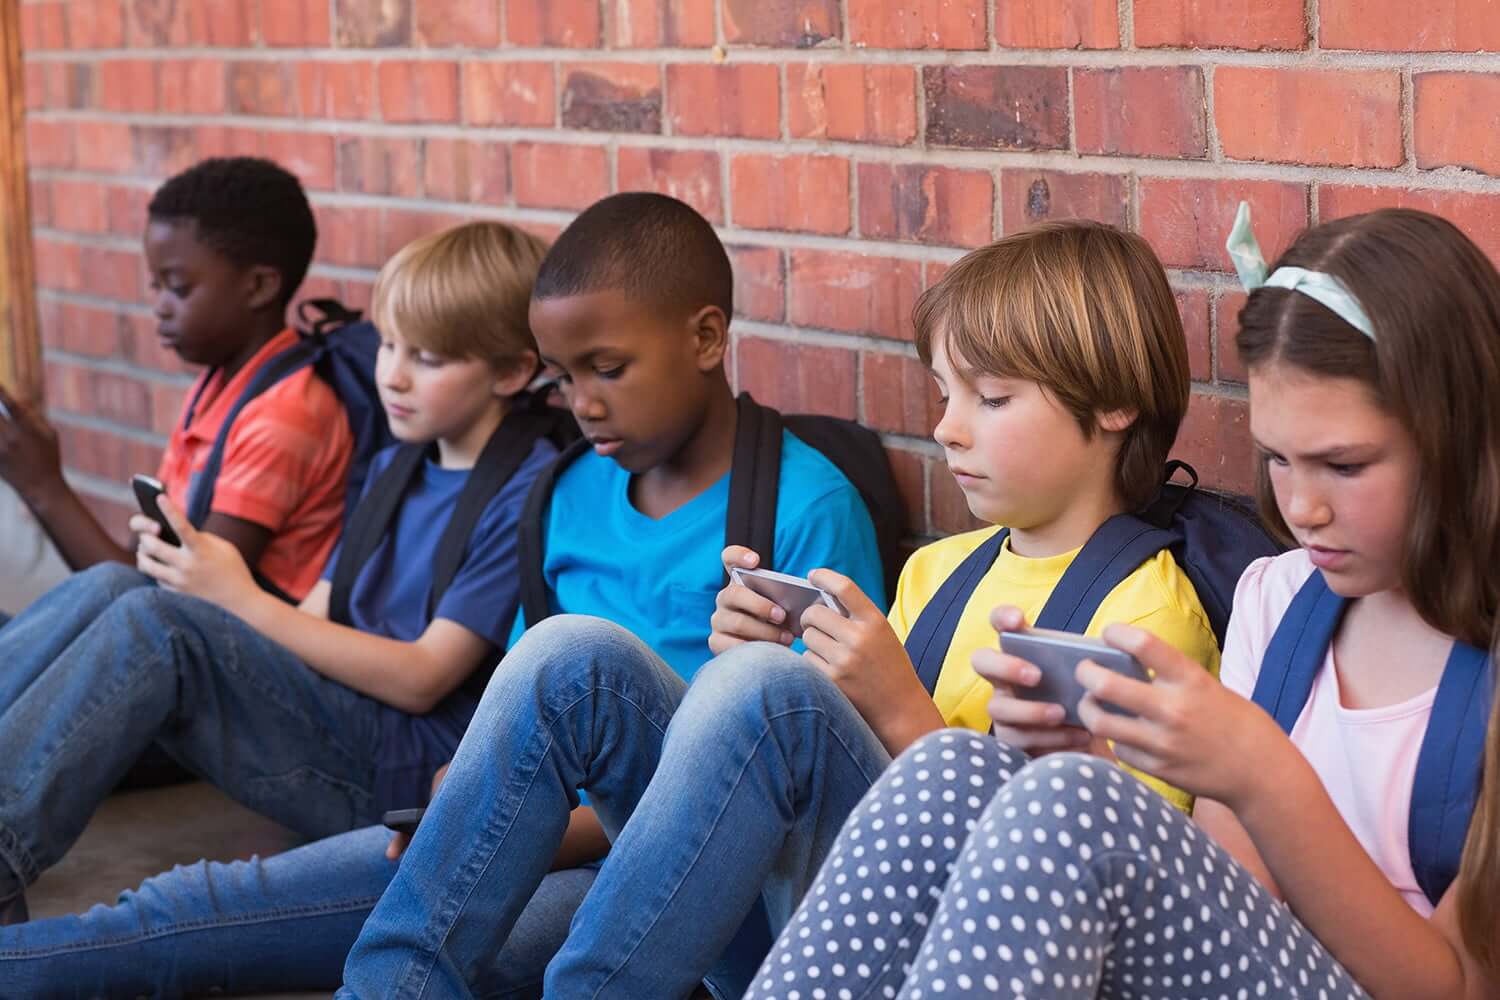 France to ban smartphone use in schools - TechSpot